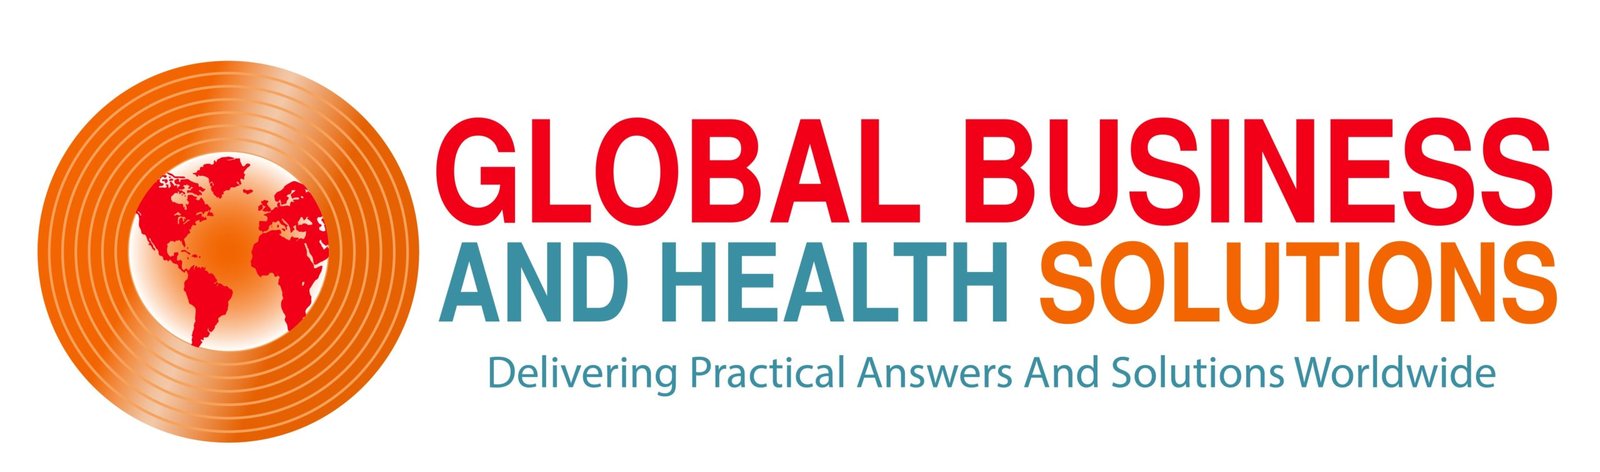 Global Business And Health Solutions